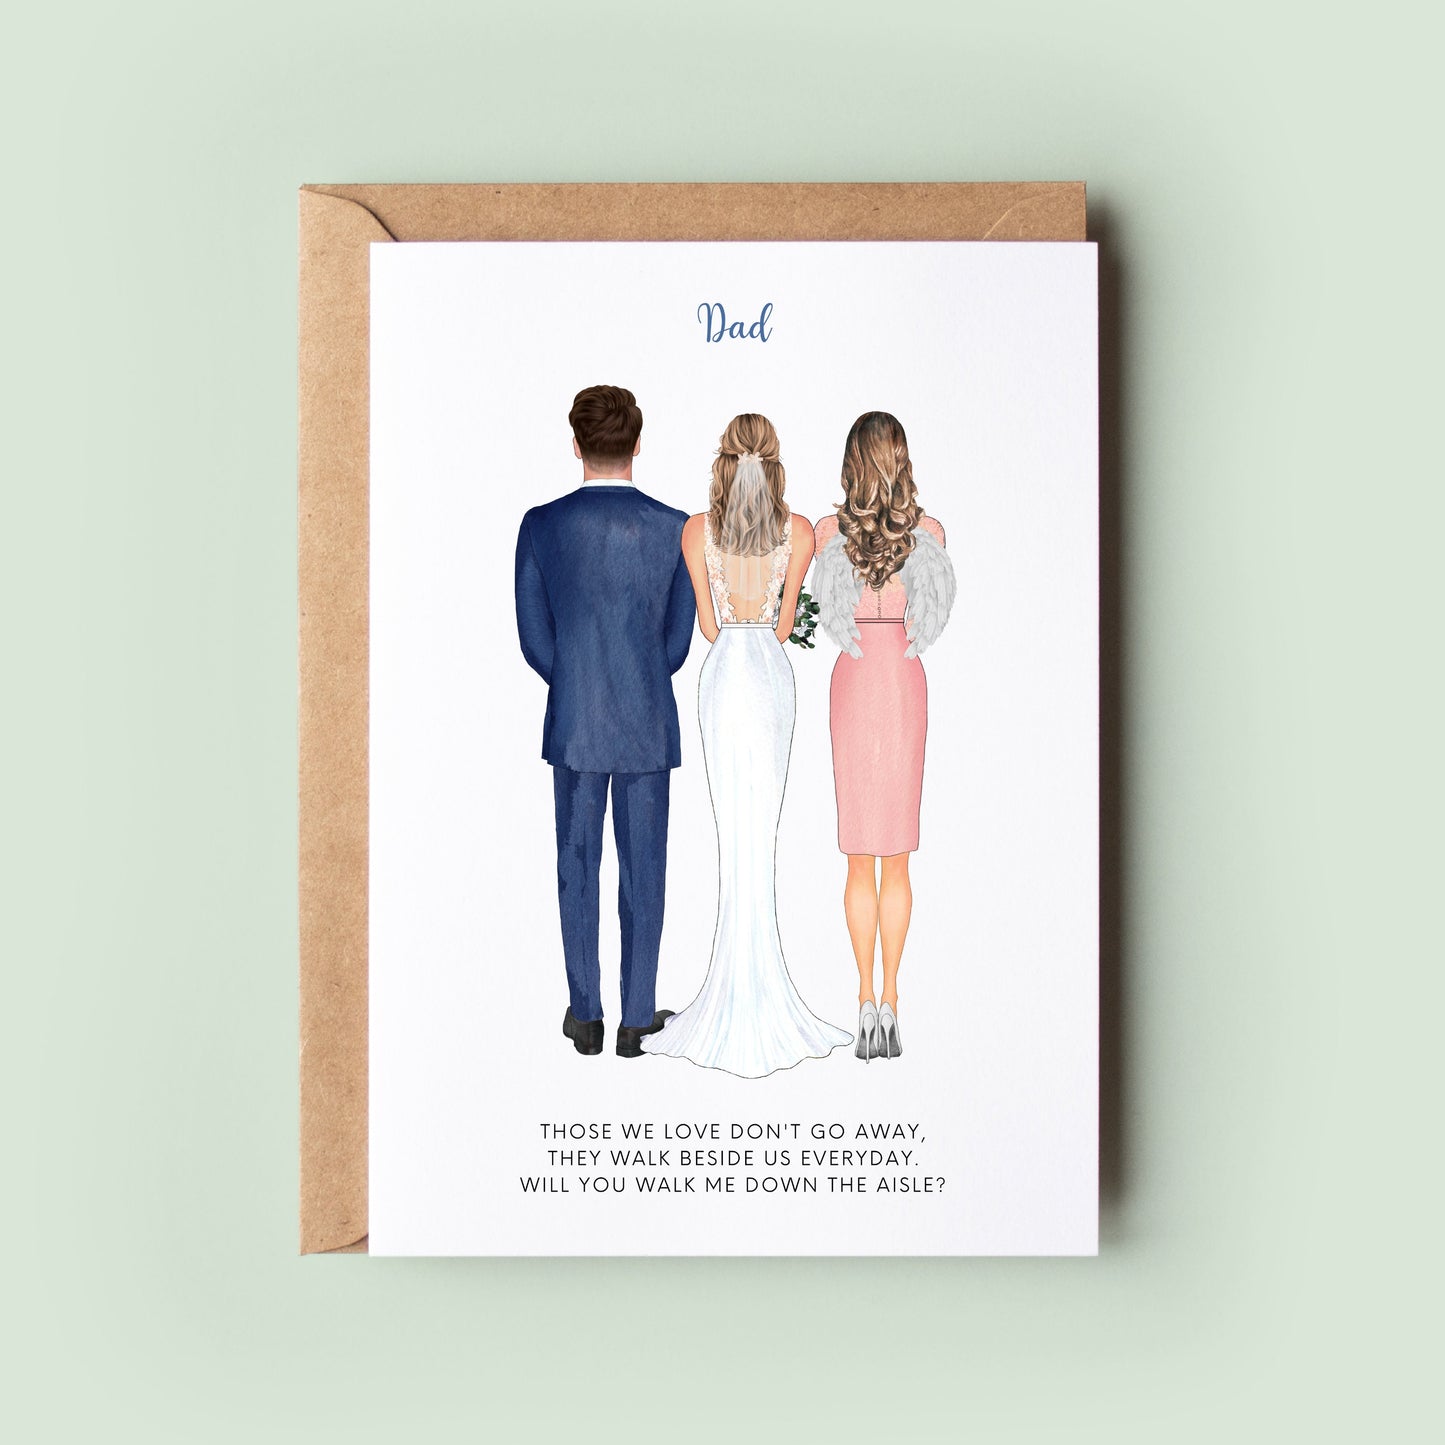 Personalised Angel Will You Walk Me Down The Aisle Wedding Card, Dad of All Our Walks Together Card, Mum Remembrance Card, Parents Wedding